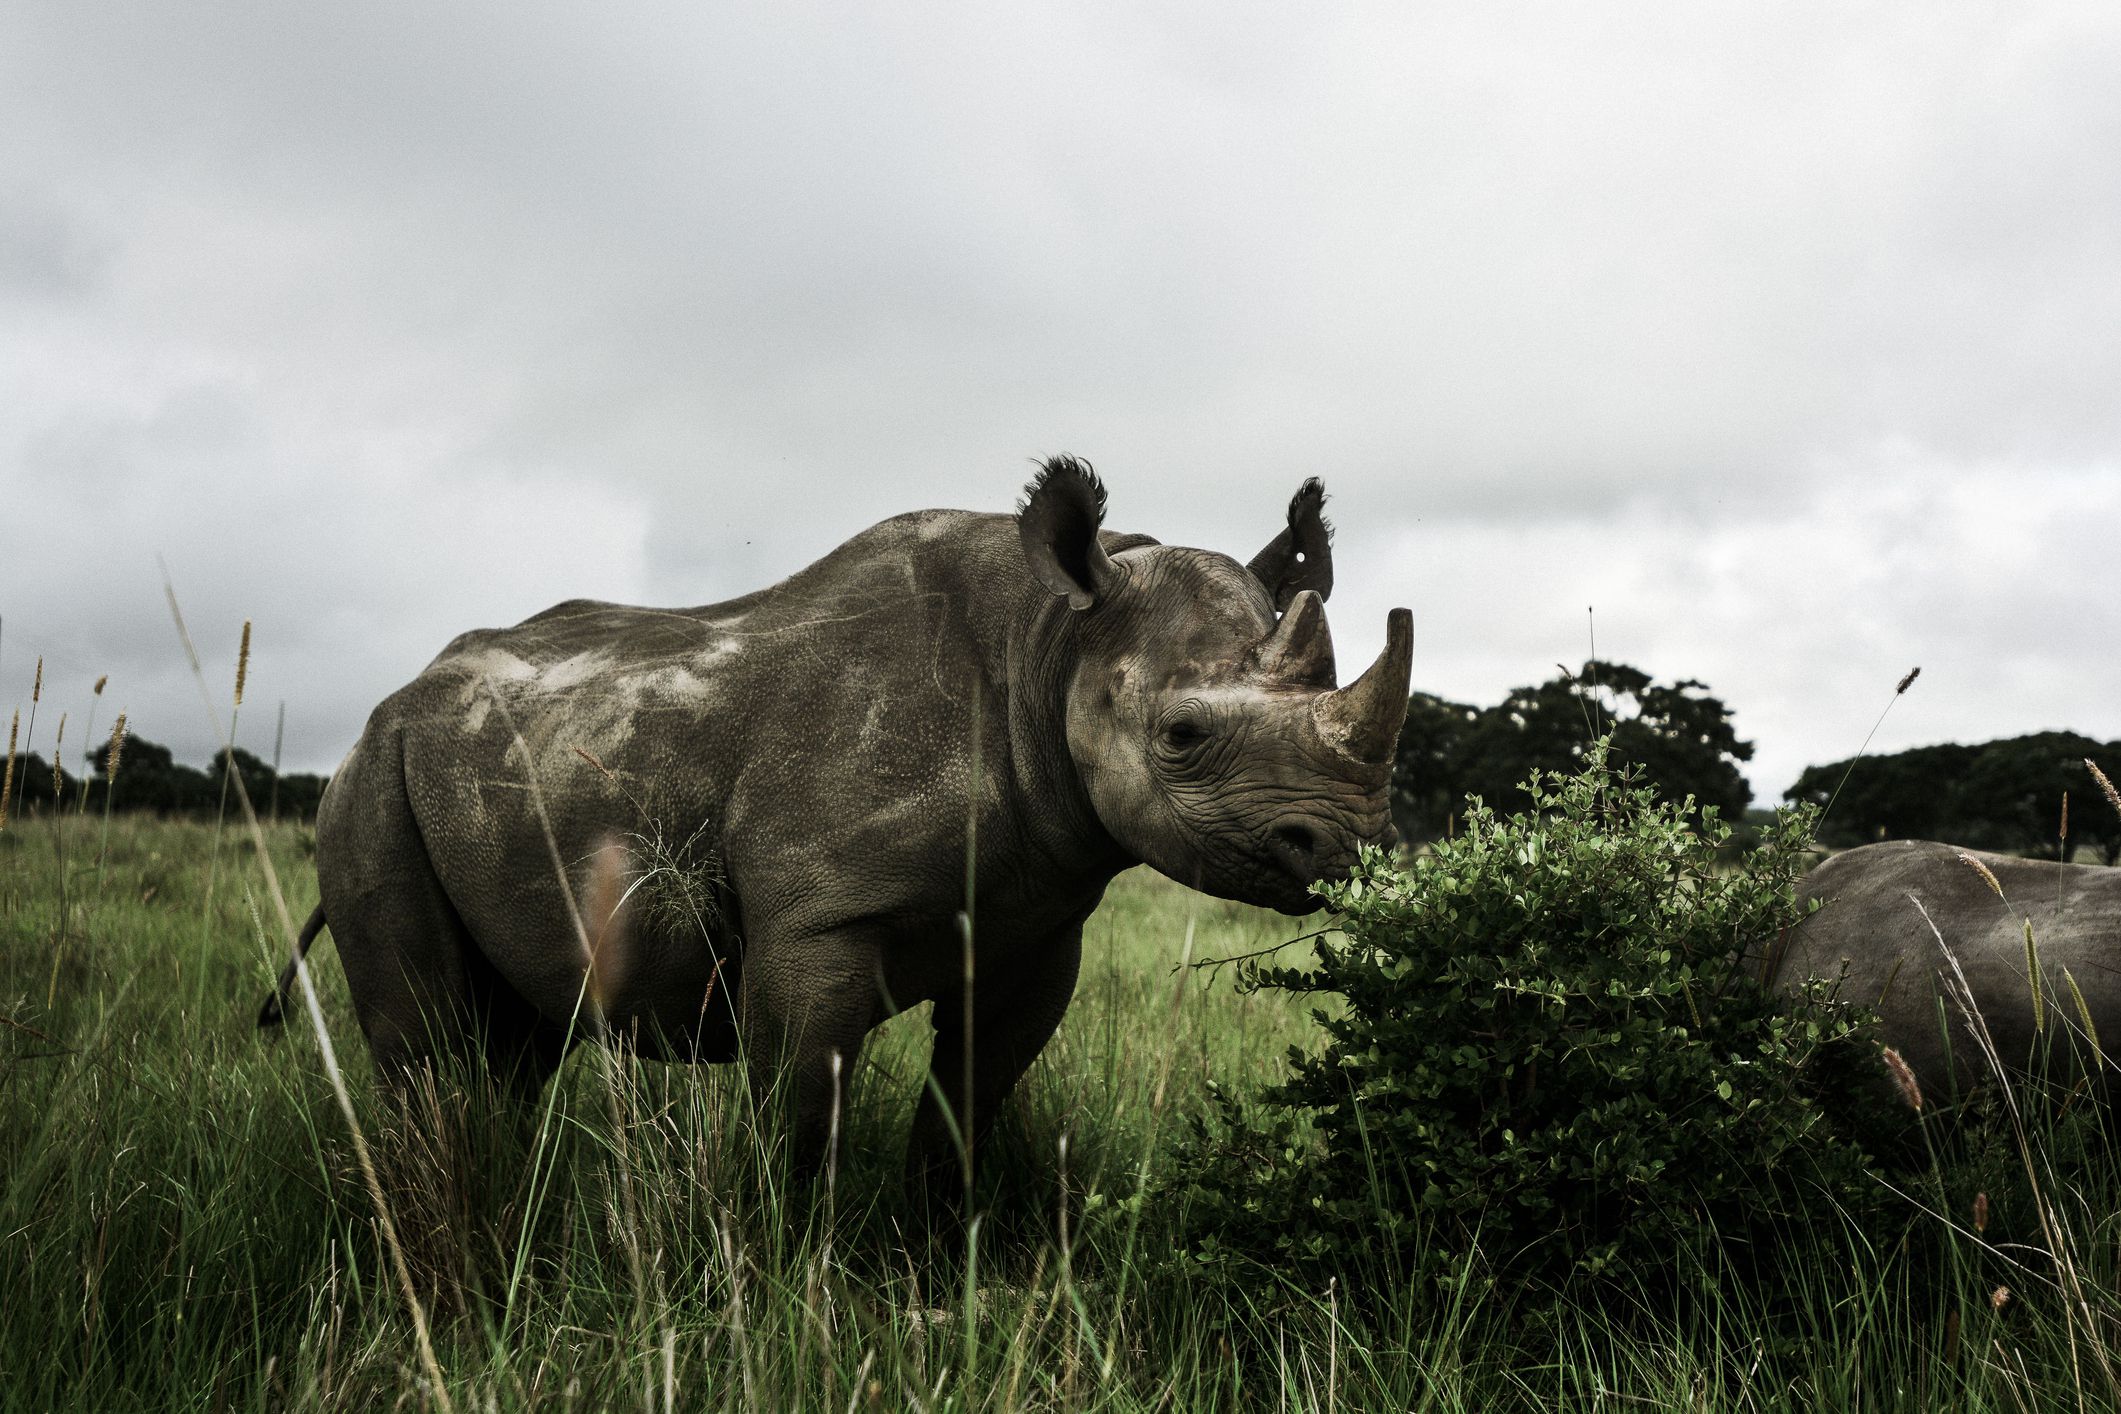 <p>Declared extinct in 2011, the Western Black Rhino was a victim of <a href="https://www.scientificamerican.com/blog/extinction-countdown/how-the-western-black-rhino-went-extinct/">rampant poaching</a> and habitat loss. Its horns, which were highly valued in traditional medicine and for ornamental or decorative purposes, were highly sought after by hunters and collectors. Despite extensive conservation efforts in their native Africa, their population continued to decline. By 1990, <a href="https://www.worldwildlife.org/species/black-rhino">96% of all Black Rhinos</a> had been wiped out. </p>